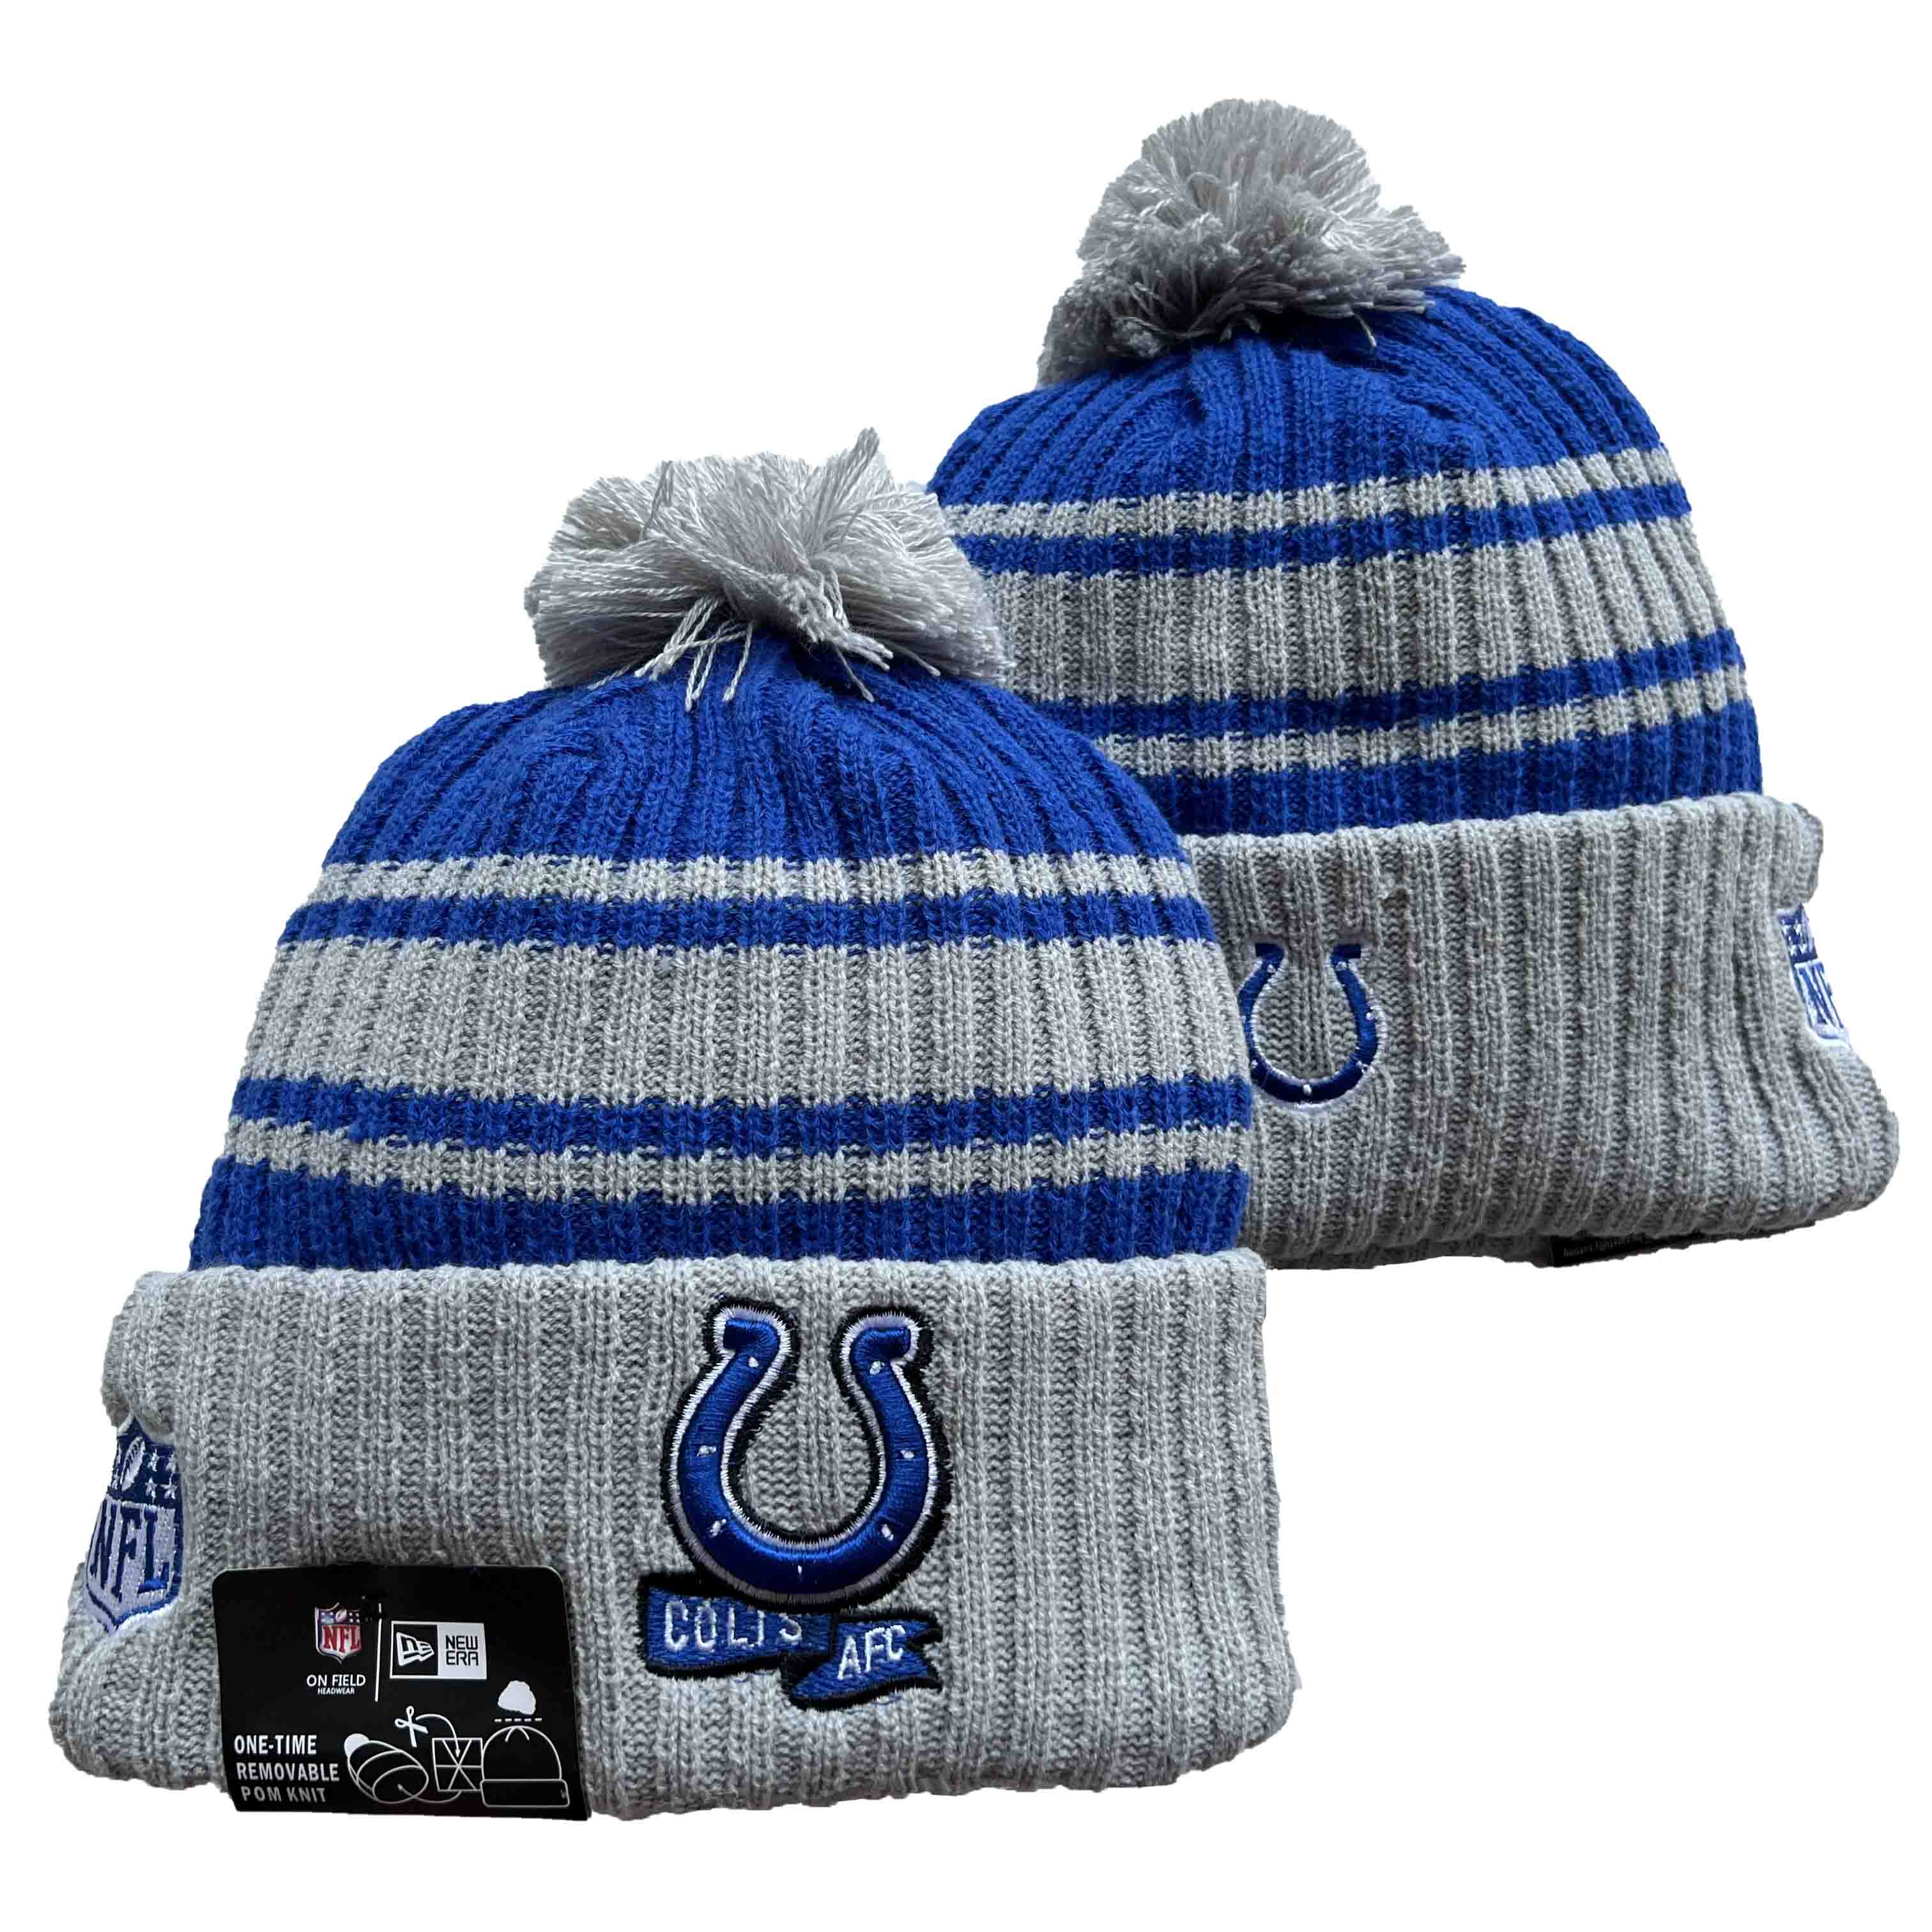 NFL Indianapolis Colts Beanies Knit Hats-YD1000